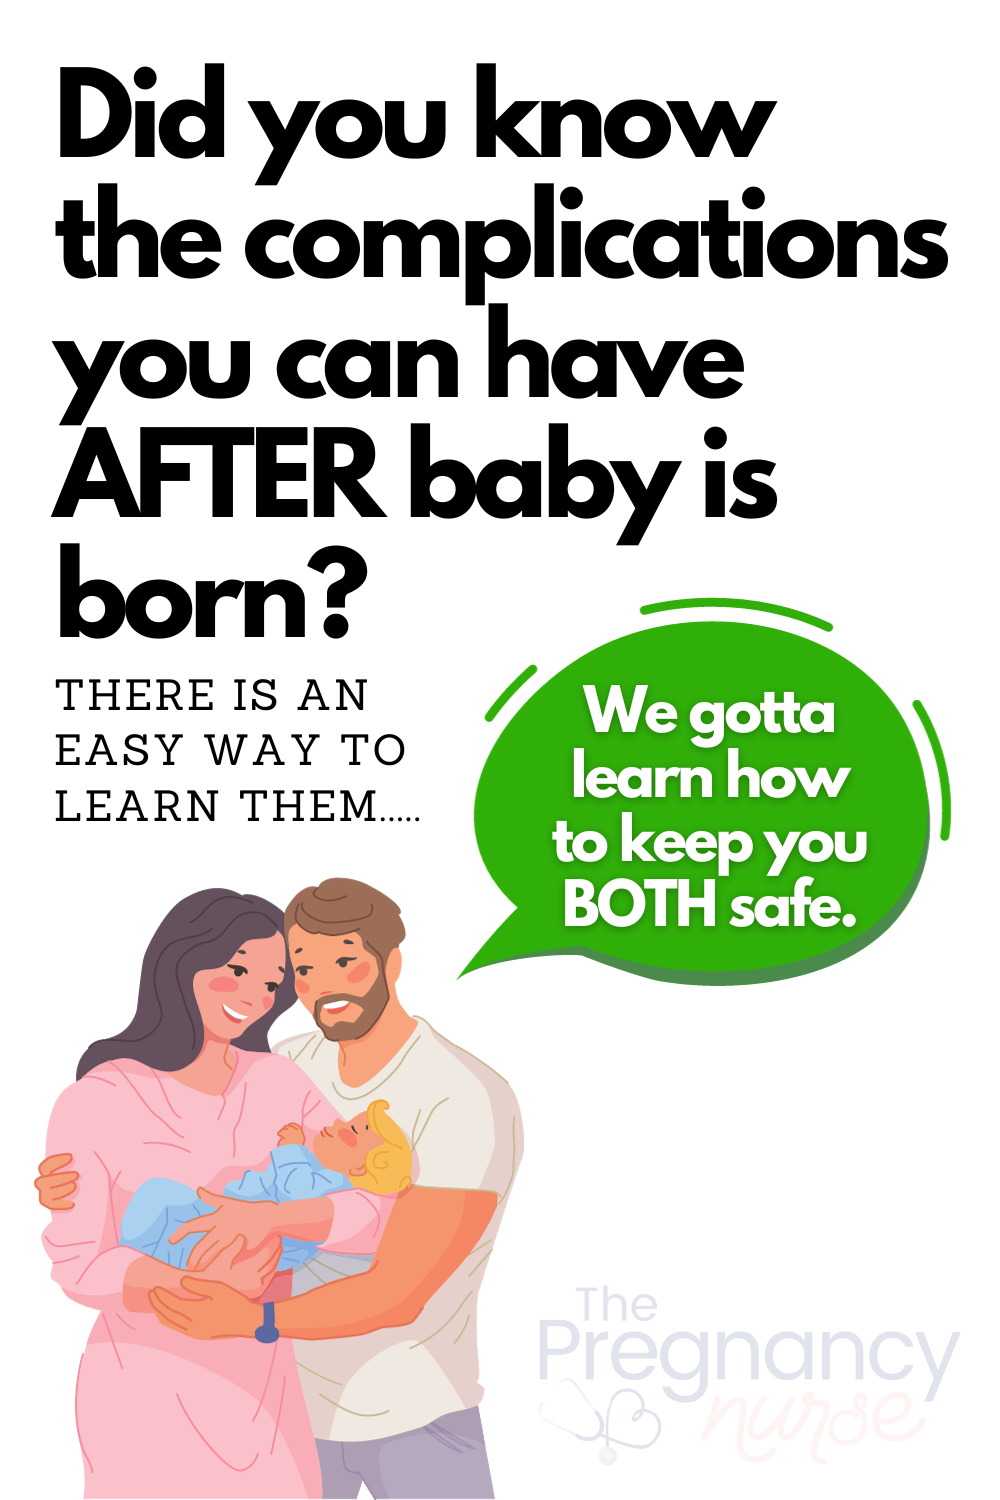 couple with a newborn saying "we gotta leanr how to keep you both safe. Did you know the complications you can hnave AFTER baby is born? There is an easy way to learn them....